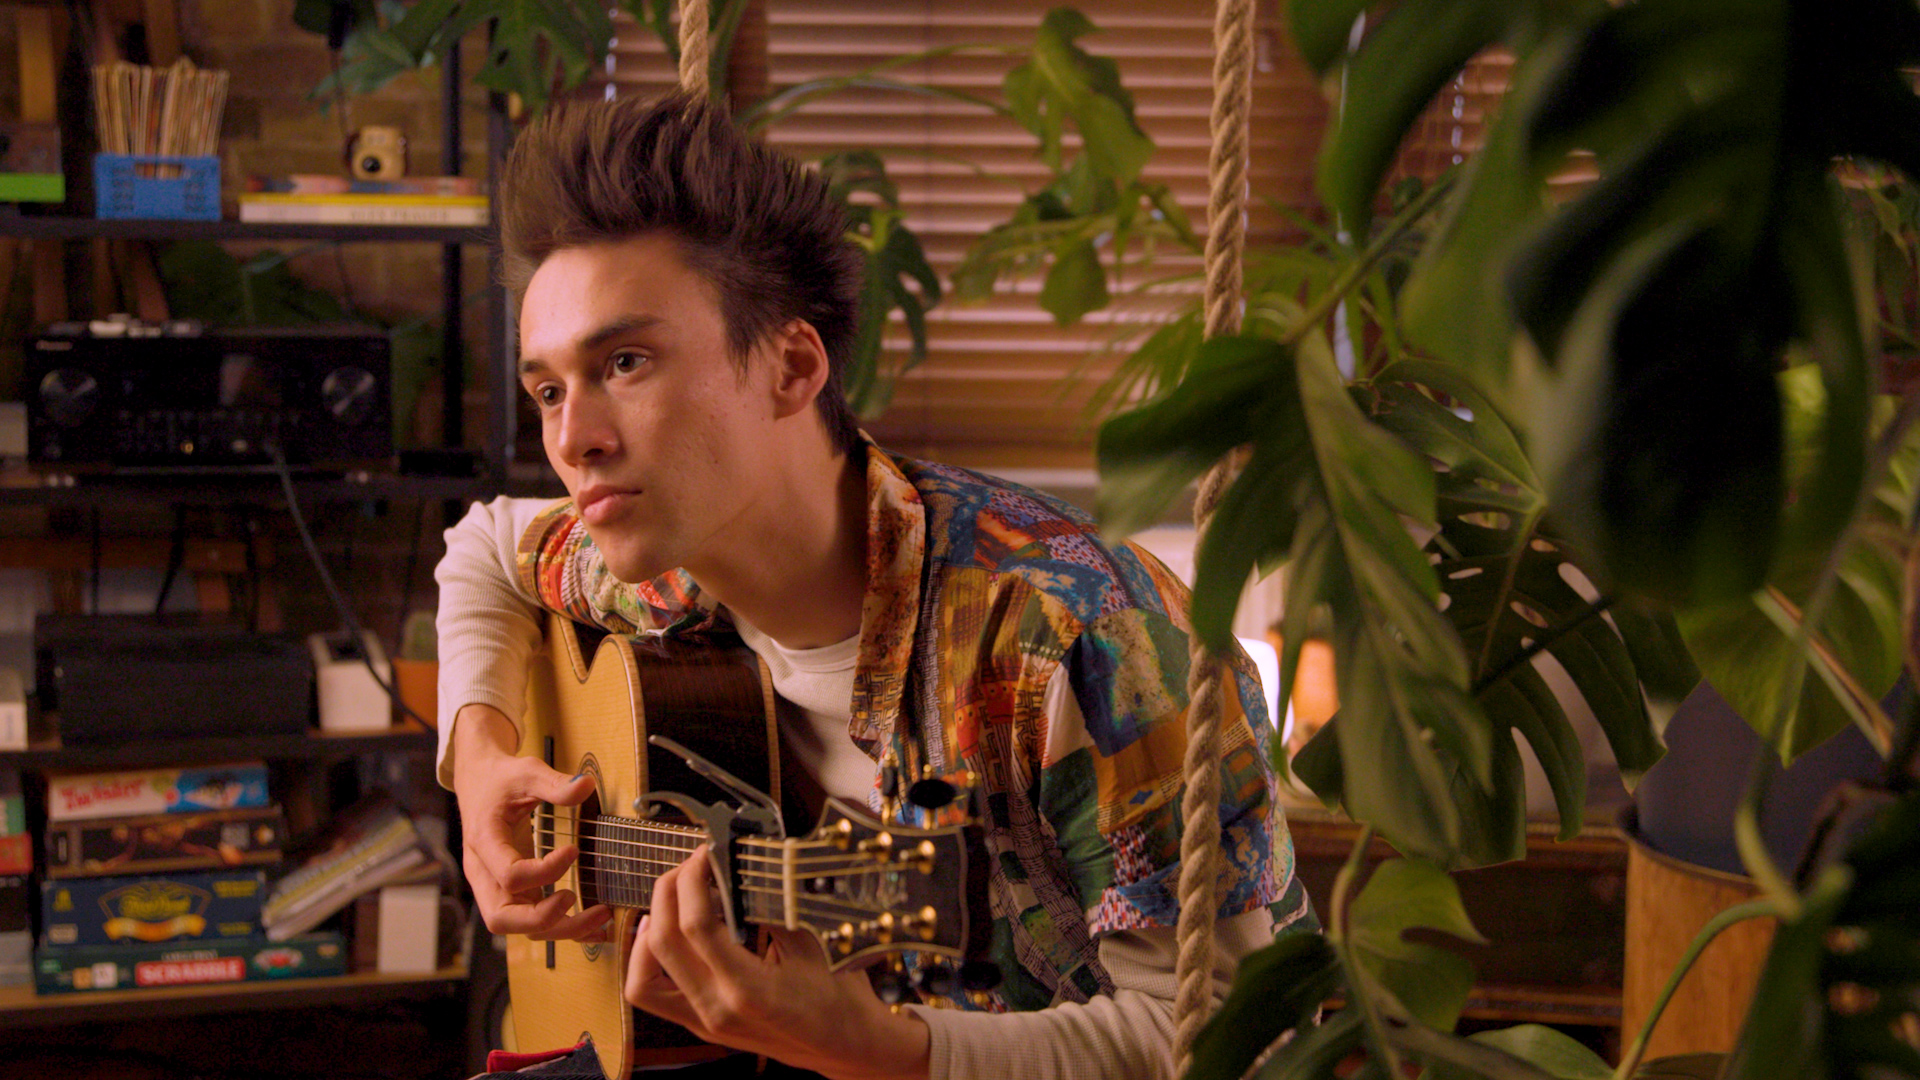 A man leans forward and strums his guitar while looking off camera. In the foreground are several green, leafy plances while a shelf of audio gear and board games can be seen in the background.